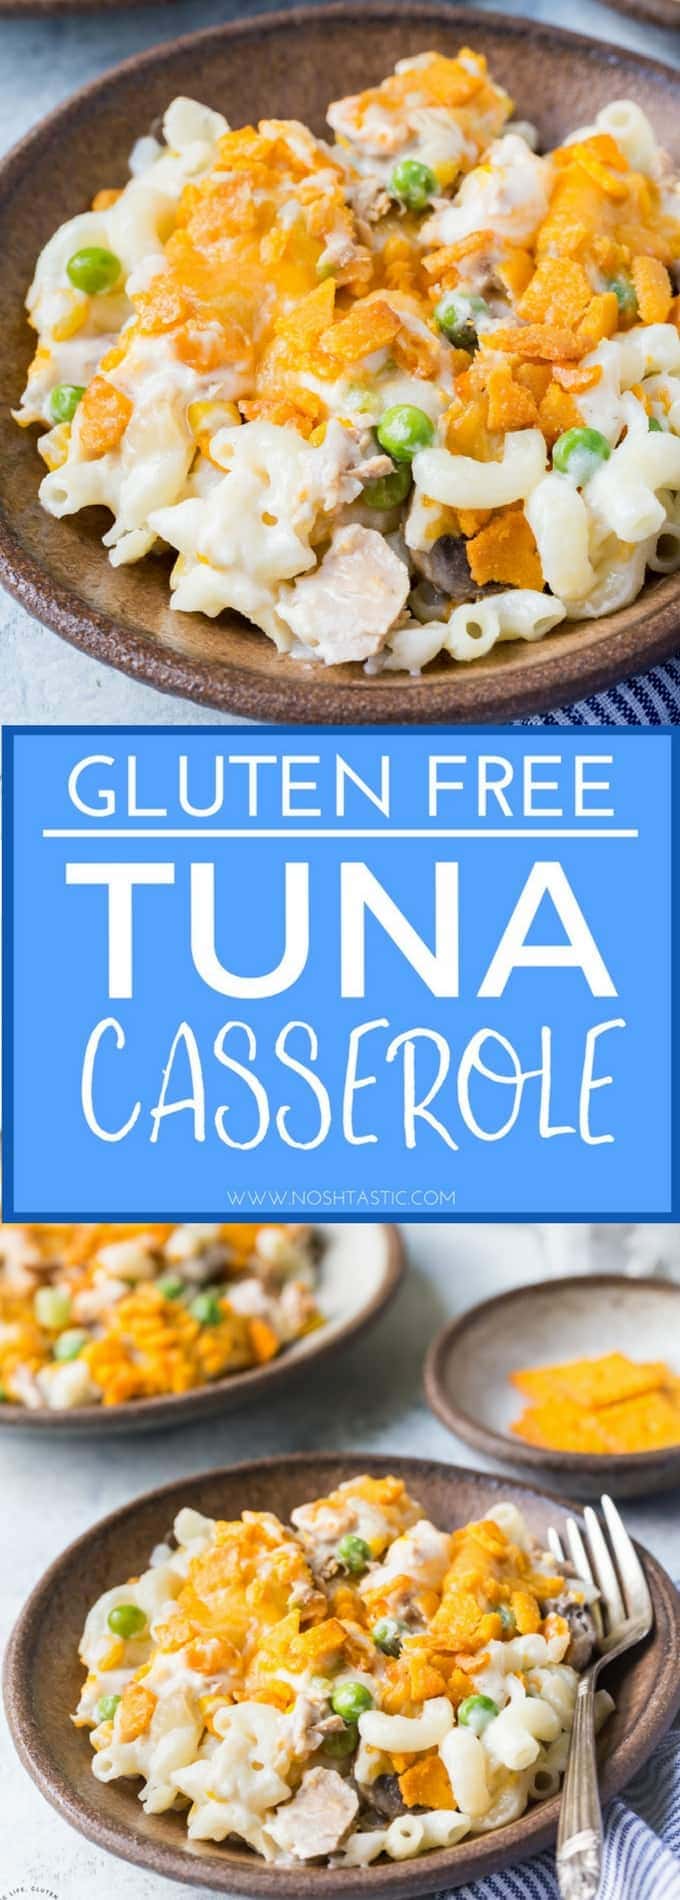 Gluten Free Tuna Casserole recipe that everyone will love! Made with gluten free cheese cracker topping that's delicious!